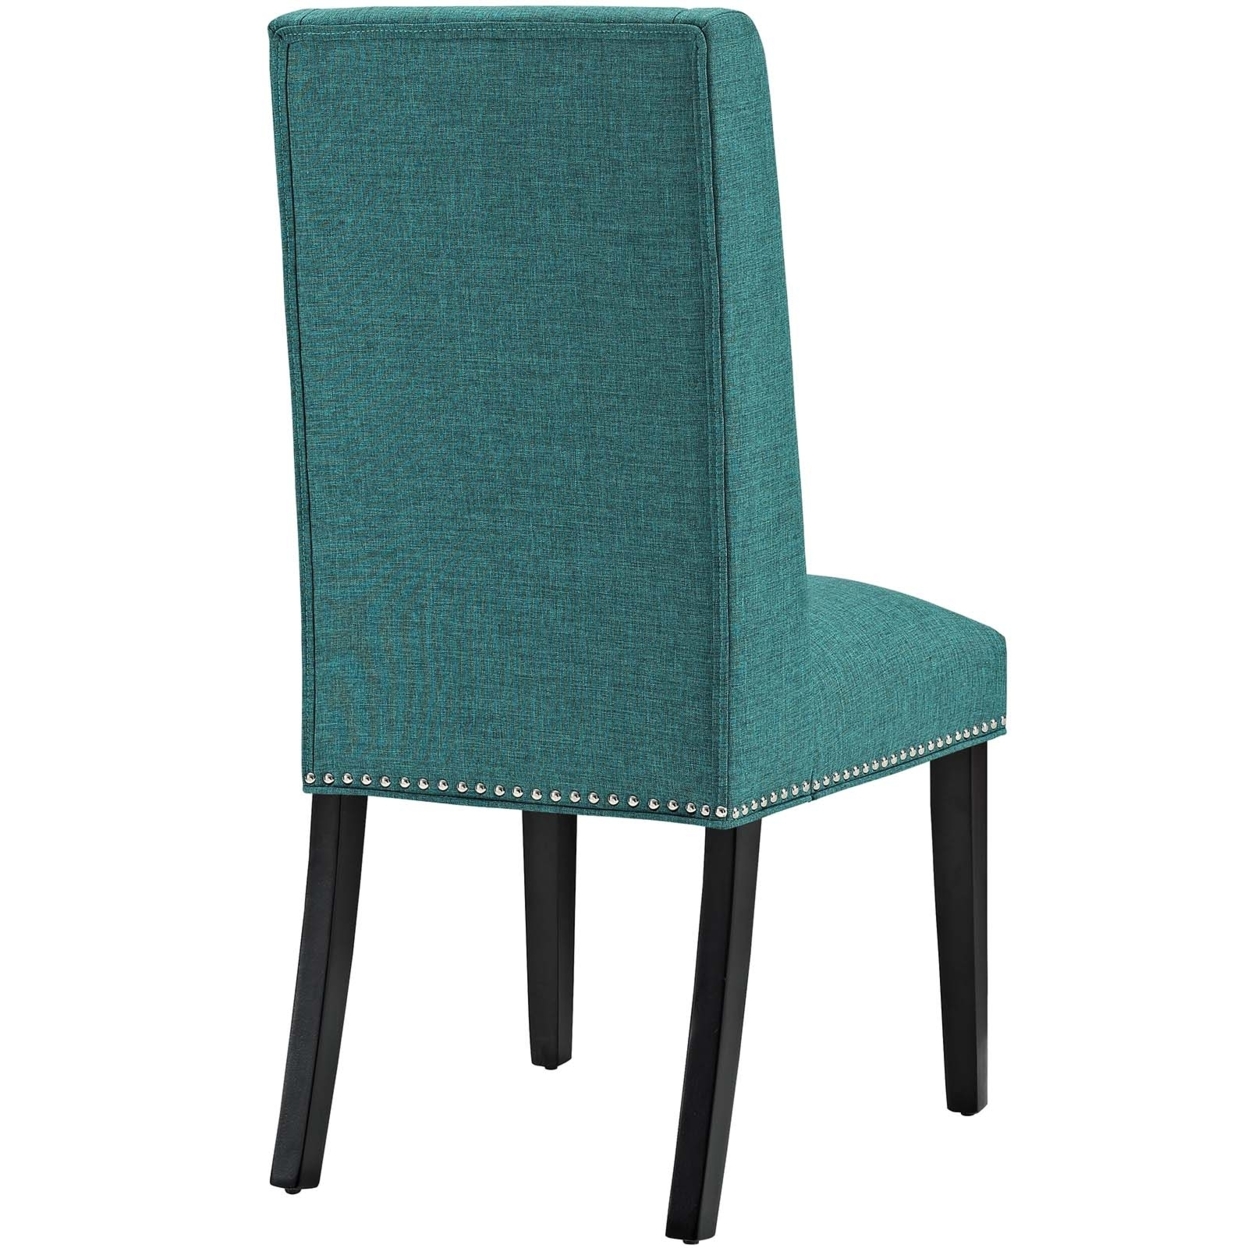 Baron Fabric Dining Chair, Teal